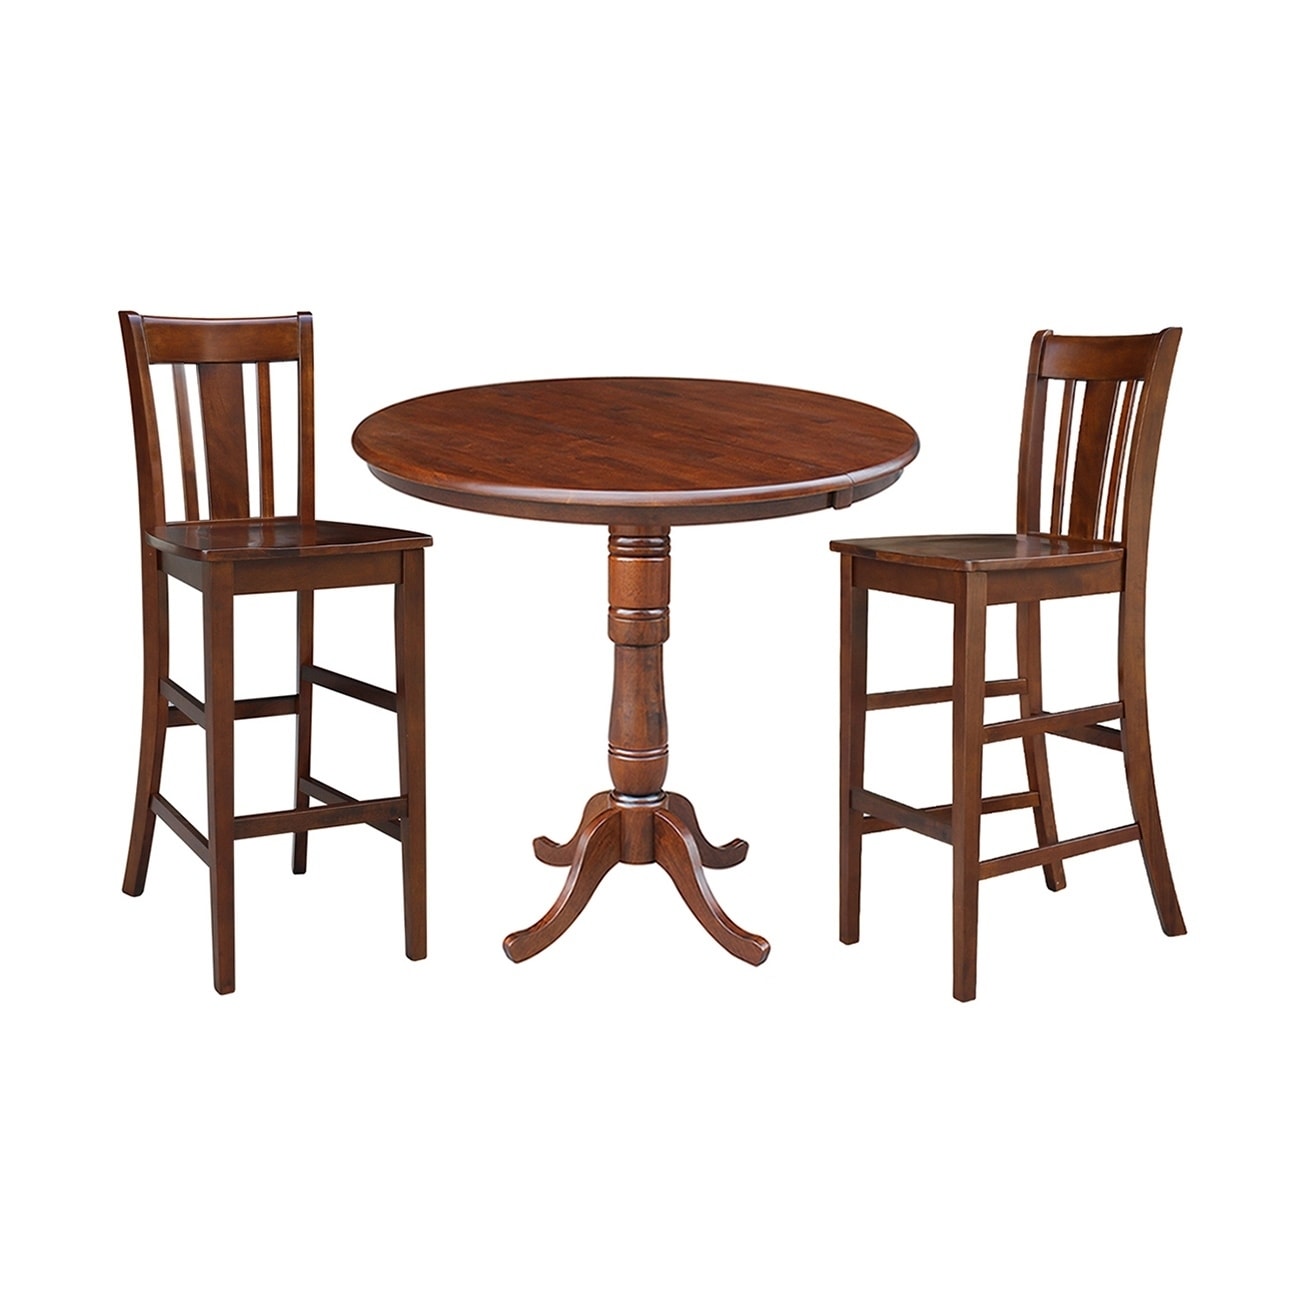 3 Piece Set - 36 Round Top Ped Bar Height Extension Table With 12 Leaf And 2 San Remo Barstools